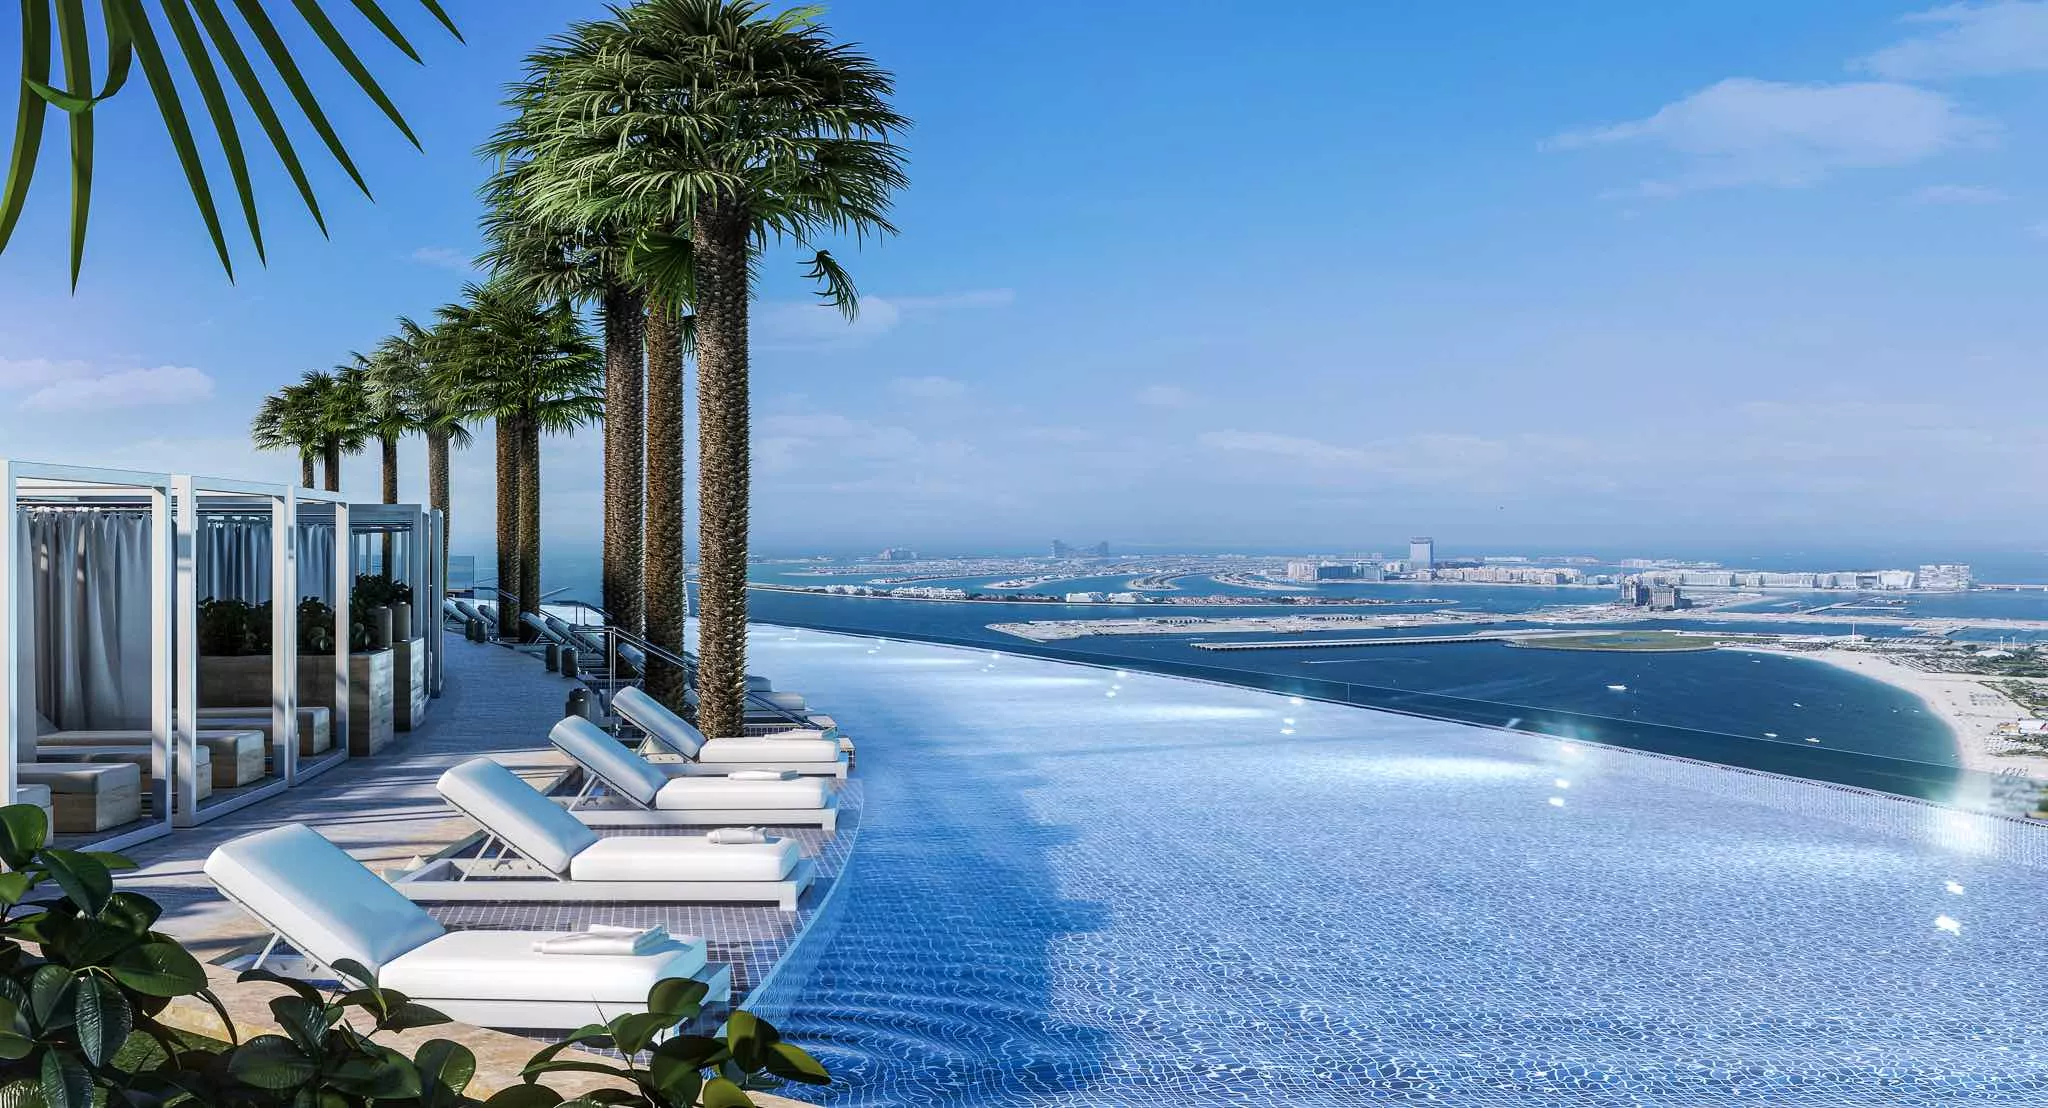 Address Beach Resort in United Arab Emirates, Middle East | Observation Decks,Swimming - Rated 4.1